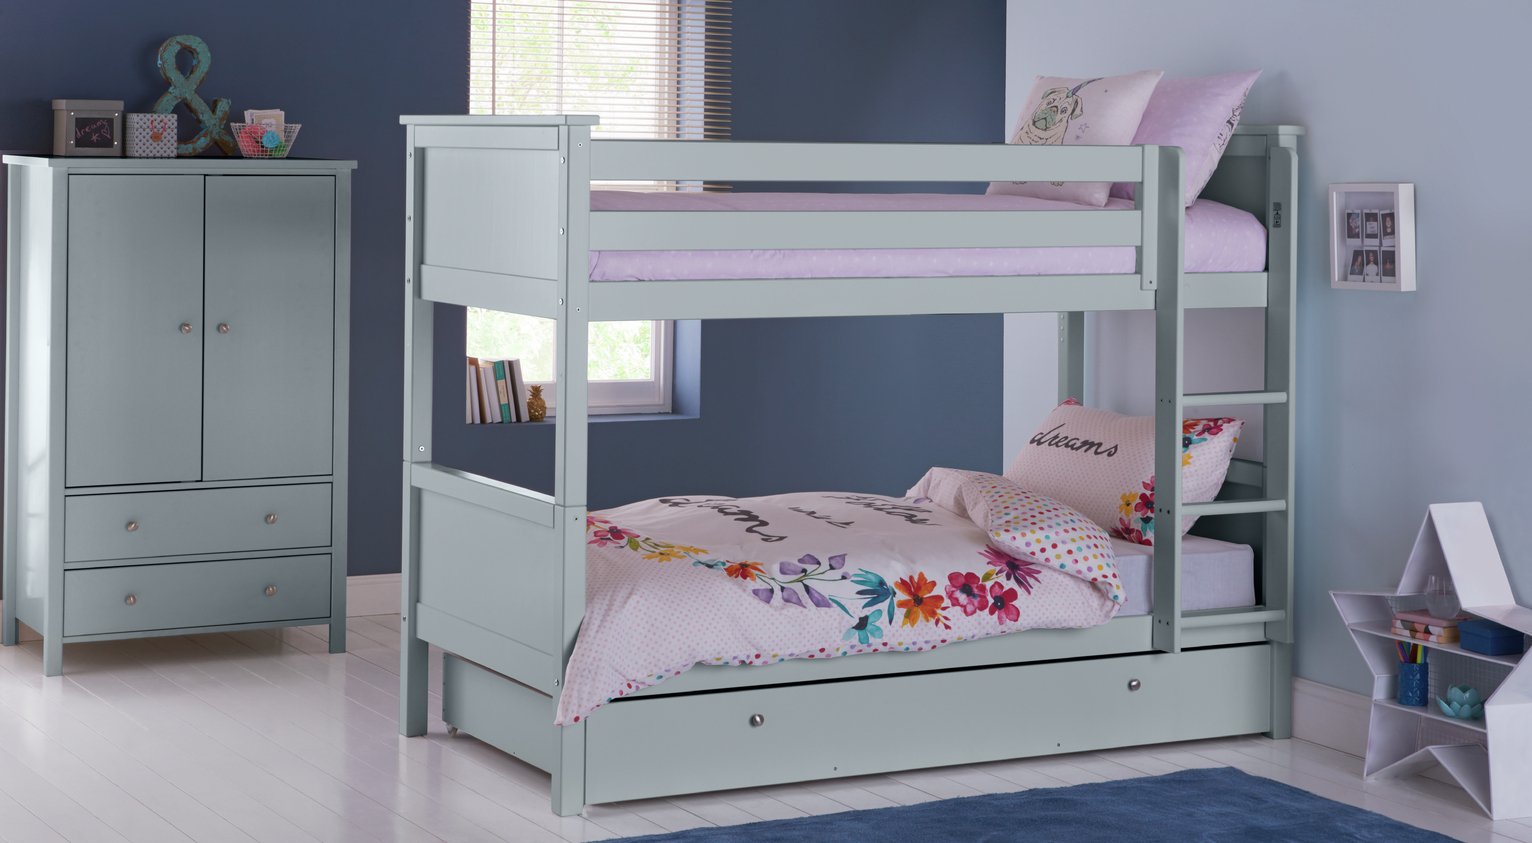 Argos Home Brooklyn Bunk Bed, Drawer and Kids Mattress -Grey Review